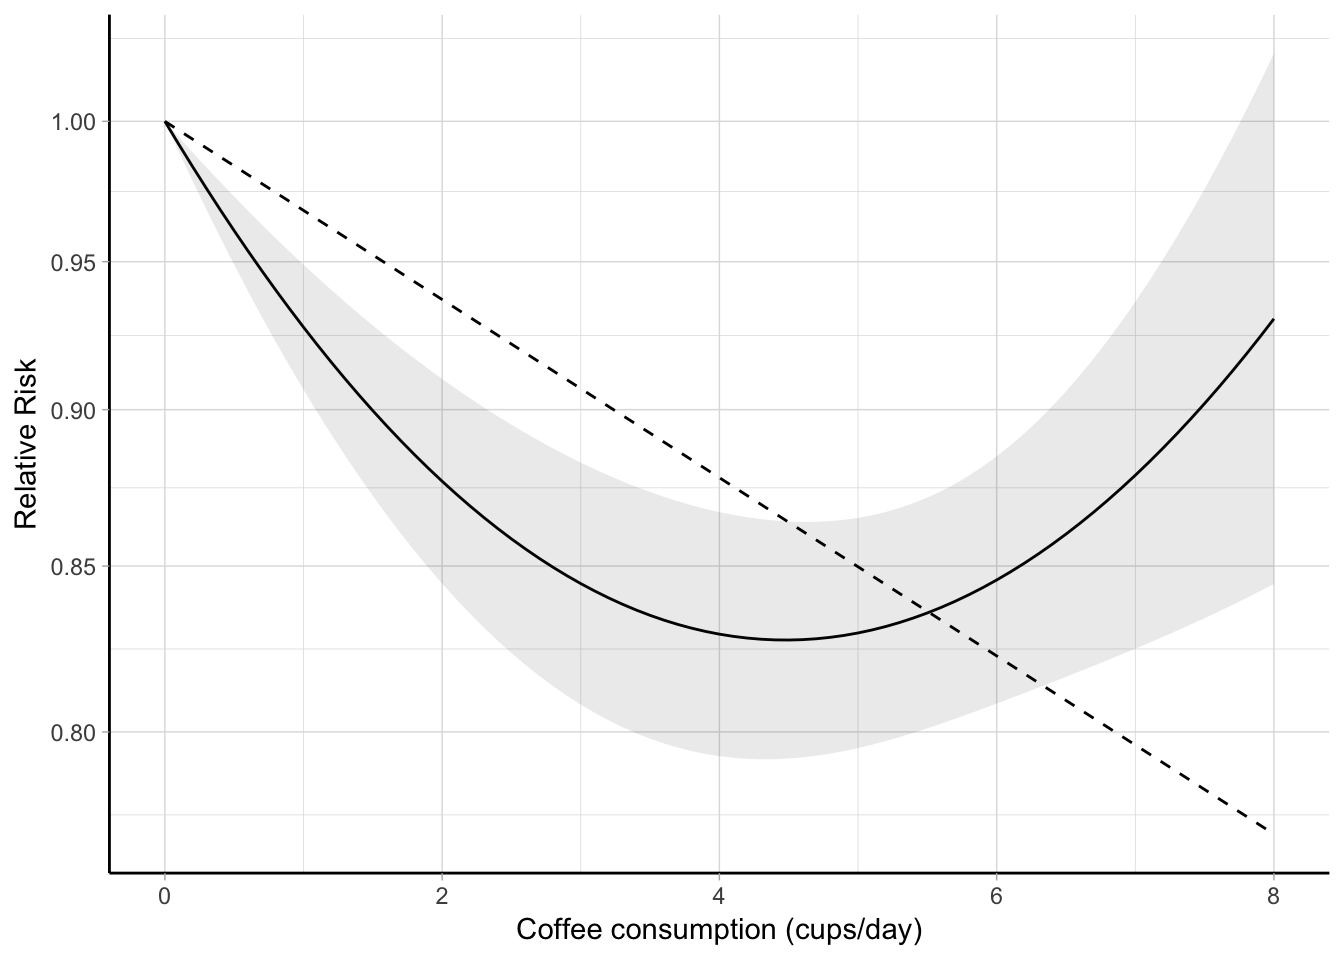 Combined dose--response association between coffee consumption and all-cause mortality (solid line) with 95% confidence intervals (shaded area). Coffee consumption was modelled with a quadratic curve in a two-stage random-effects meta-analysis. The dashed line represents the combined linear trend. The value 0 cups/day served as referent. The relative risks are plotted on the log scale.